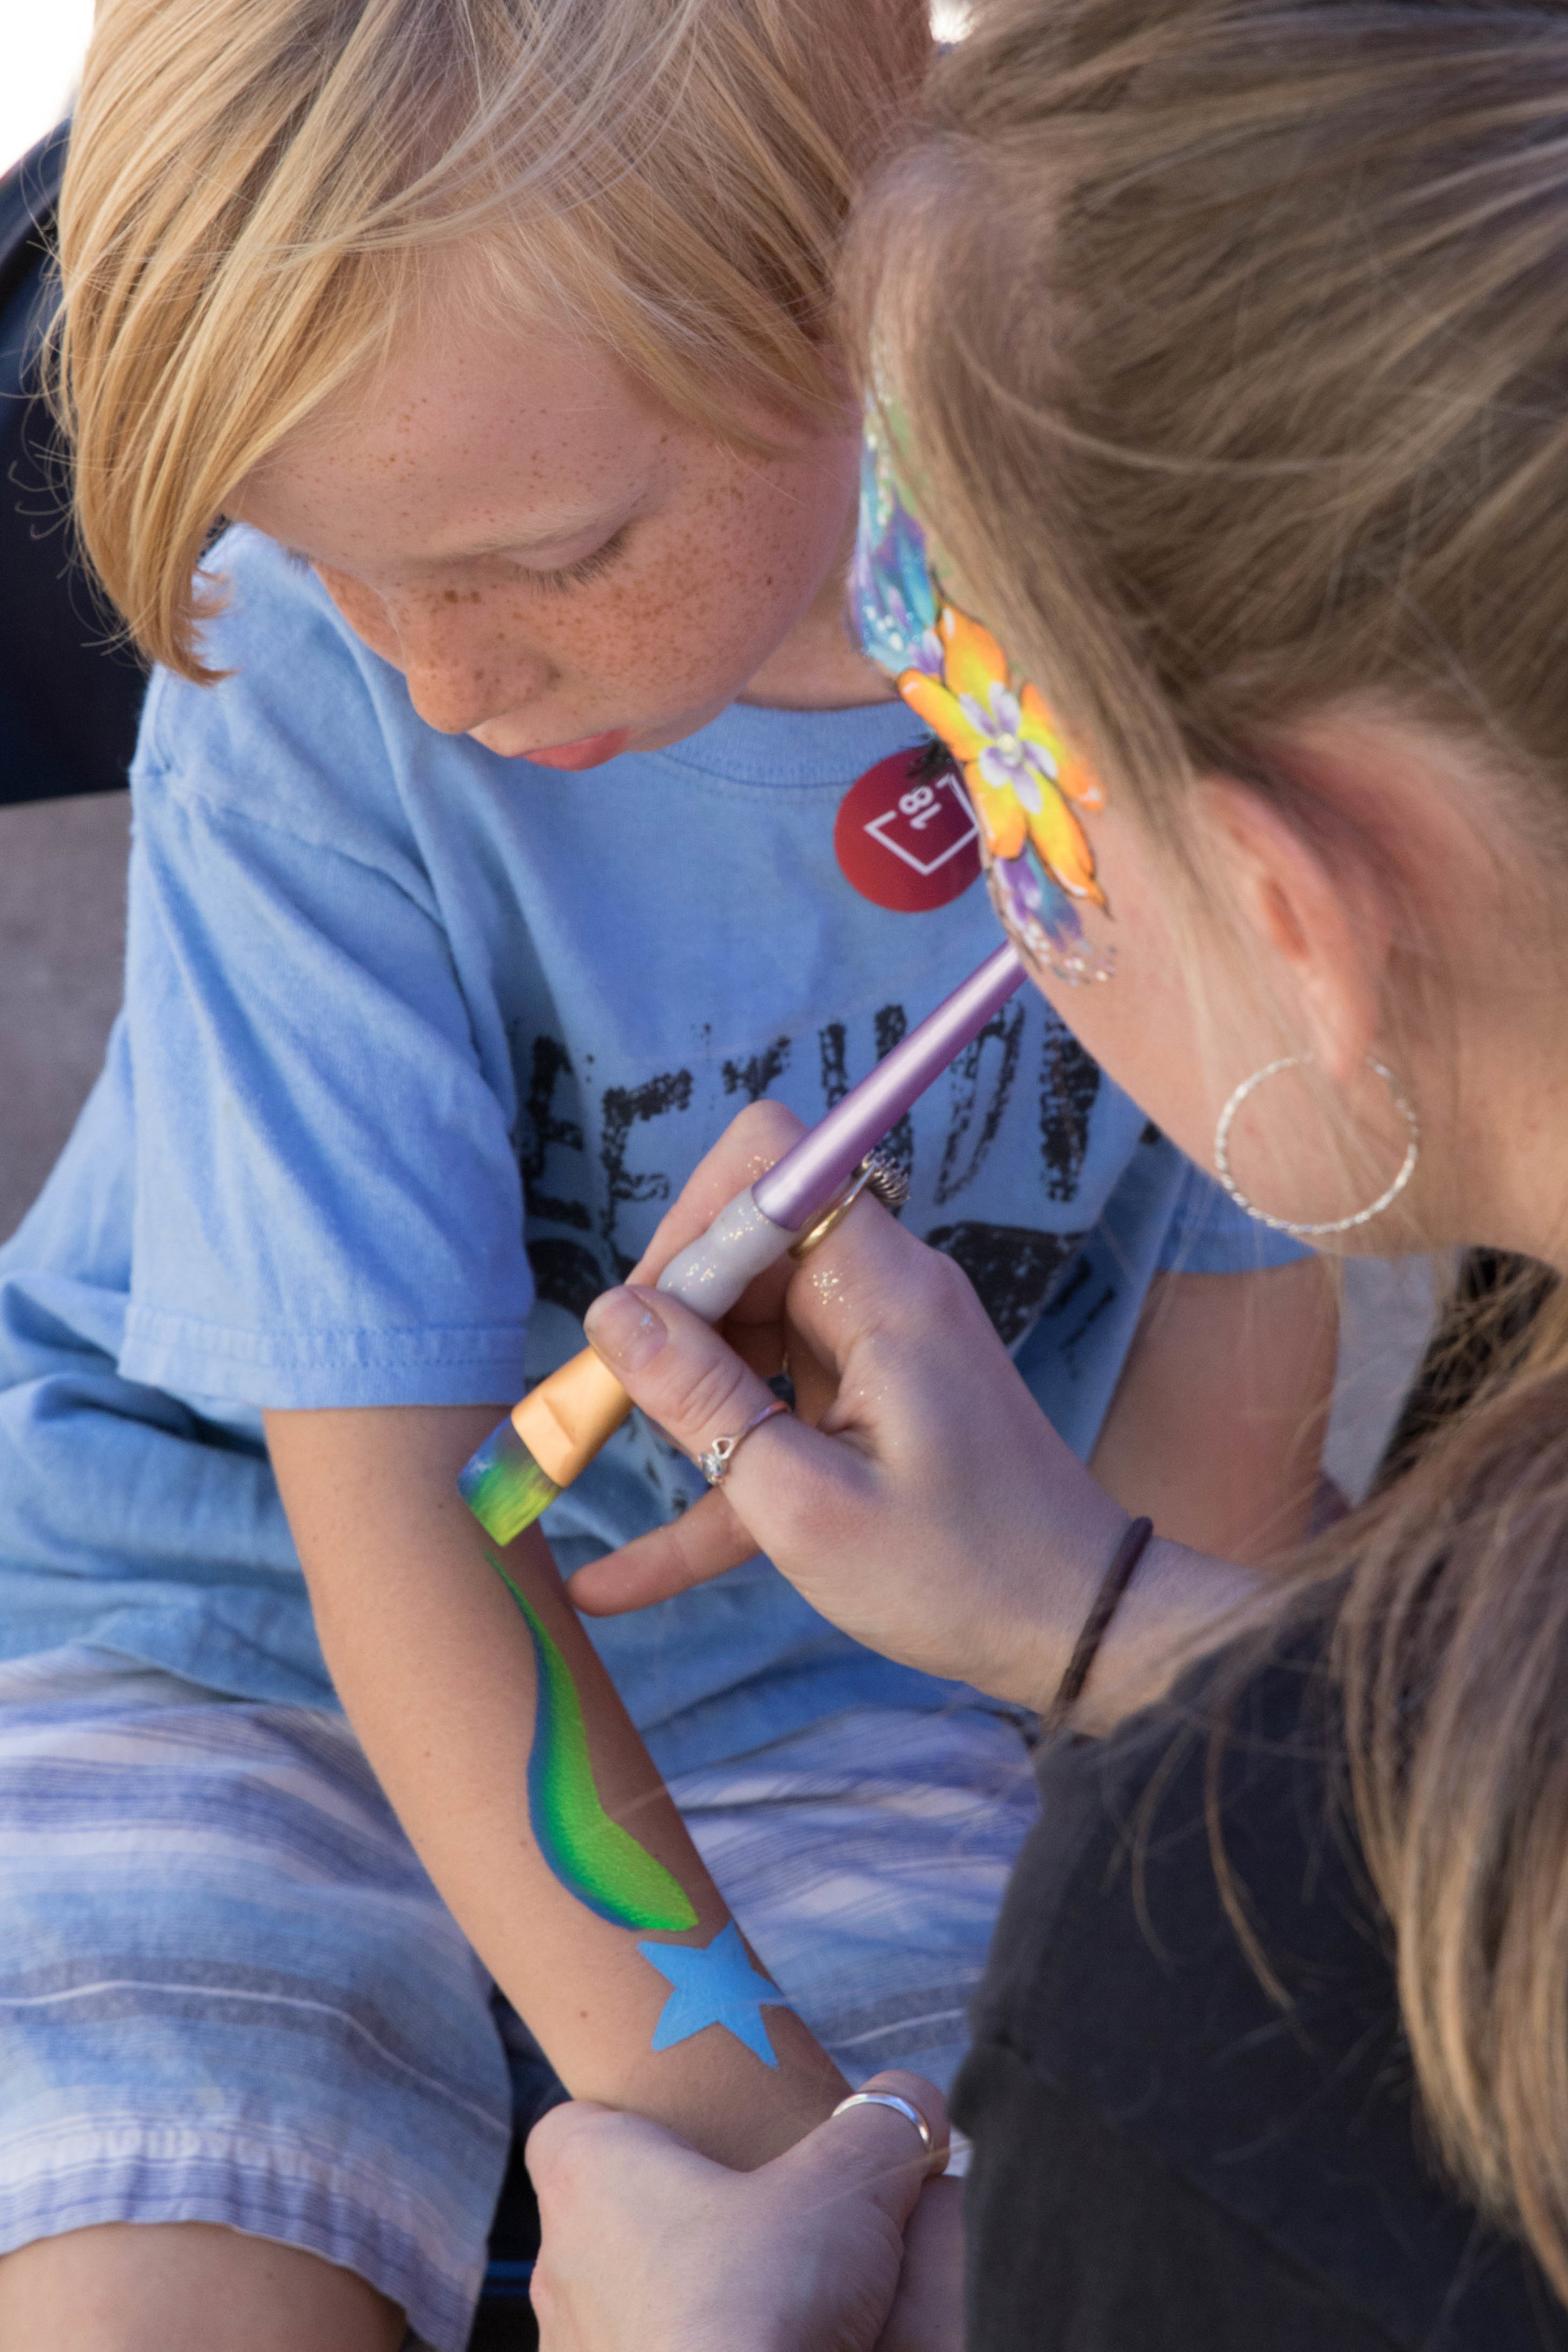  Rylan Boothby (left) gets an arm drawing done by Oriana as part of the Pico Block Party on October 14, 2017 (Photo By: Zane Meyer-Thornton) 